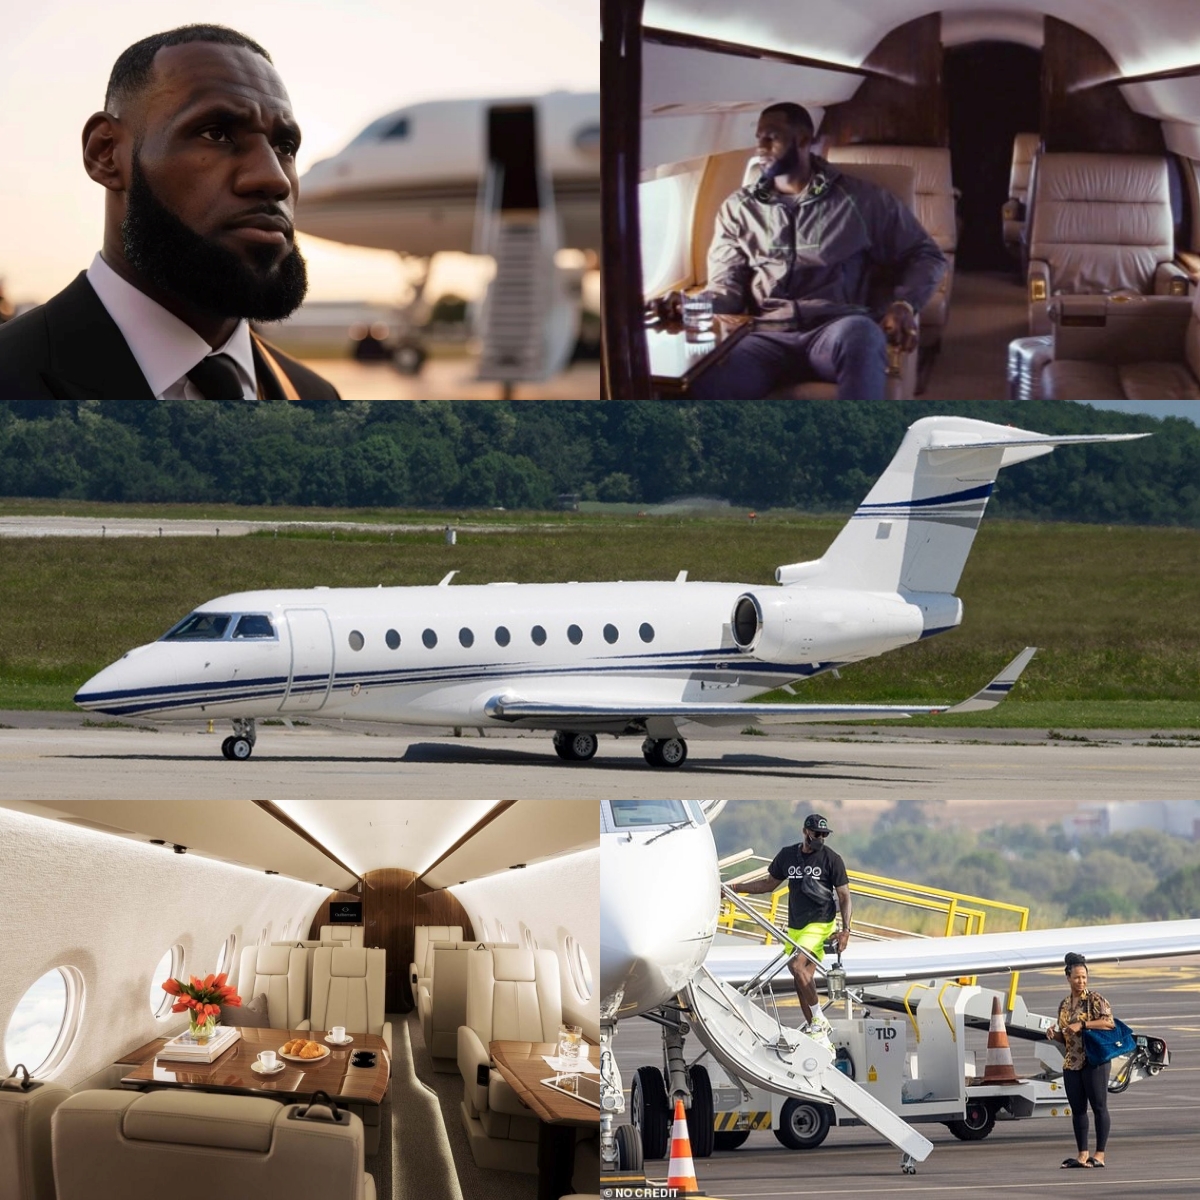 LeBron James’ $2,000,000 private jet elevates luxury for unforgettable family vacations.1